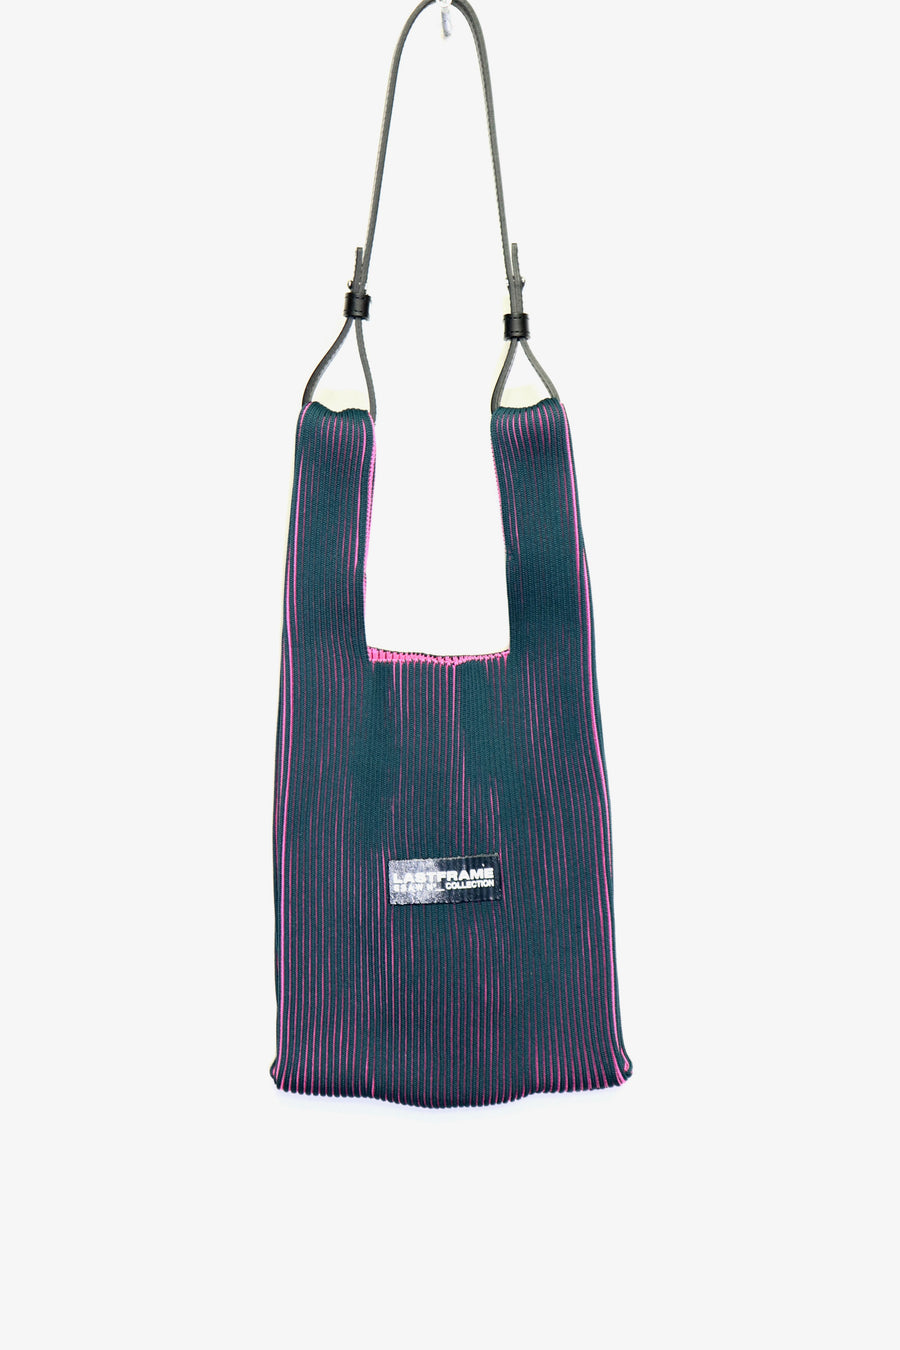 LASTFRAME  TWO TONE MARKET BAG SMALL（DARK GREEN x NEON PINK）